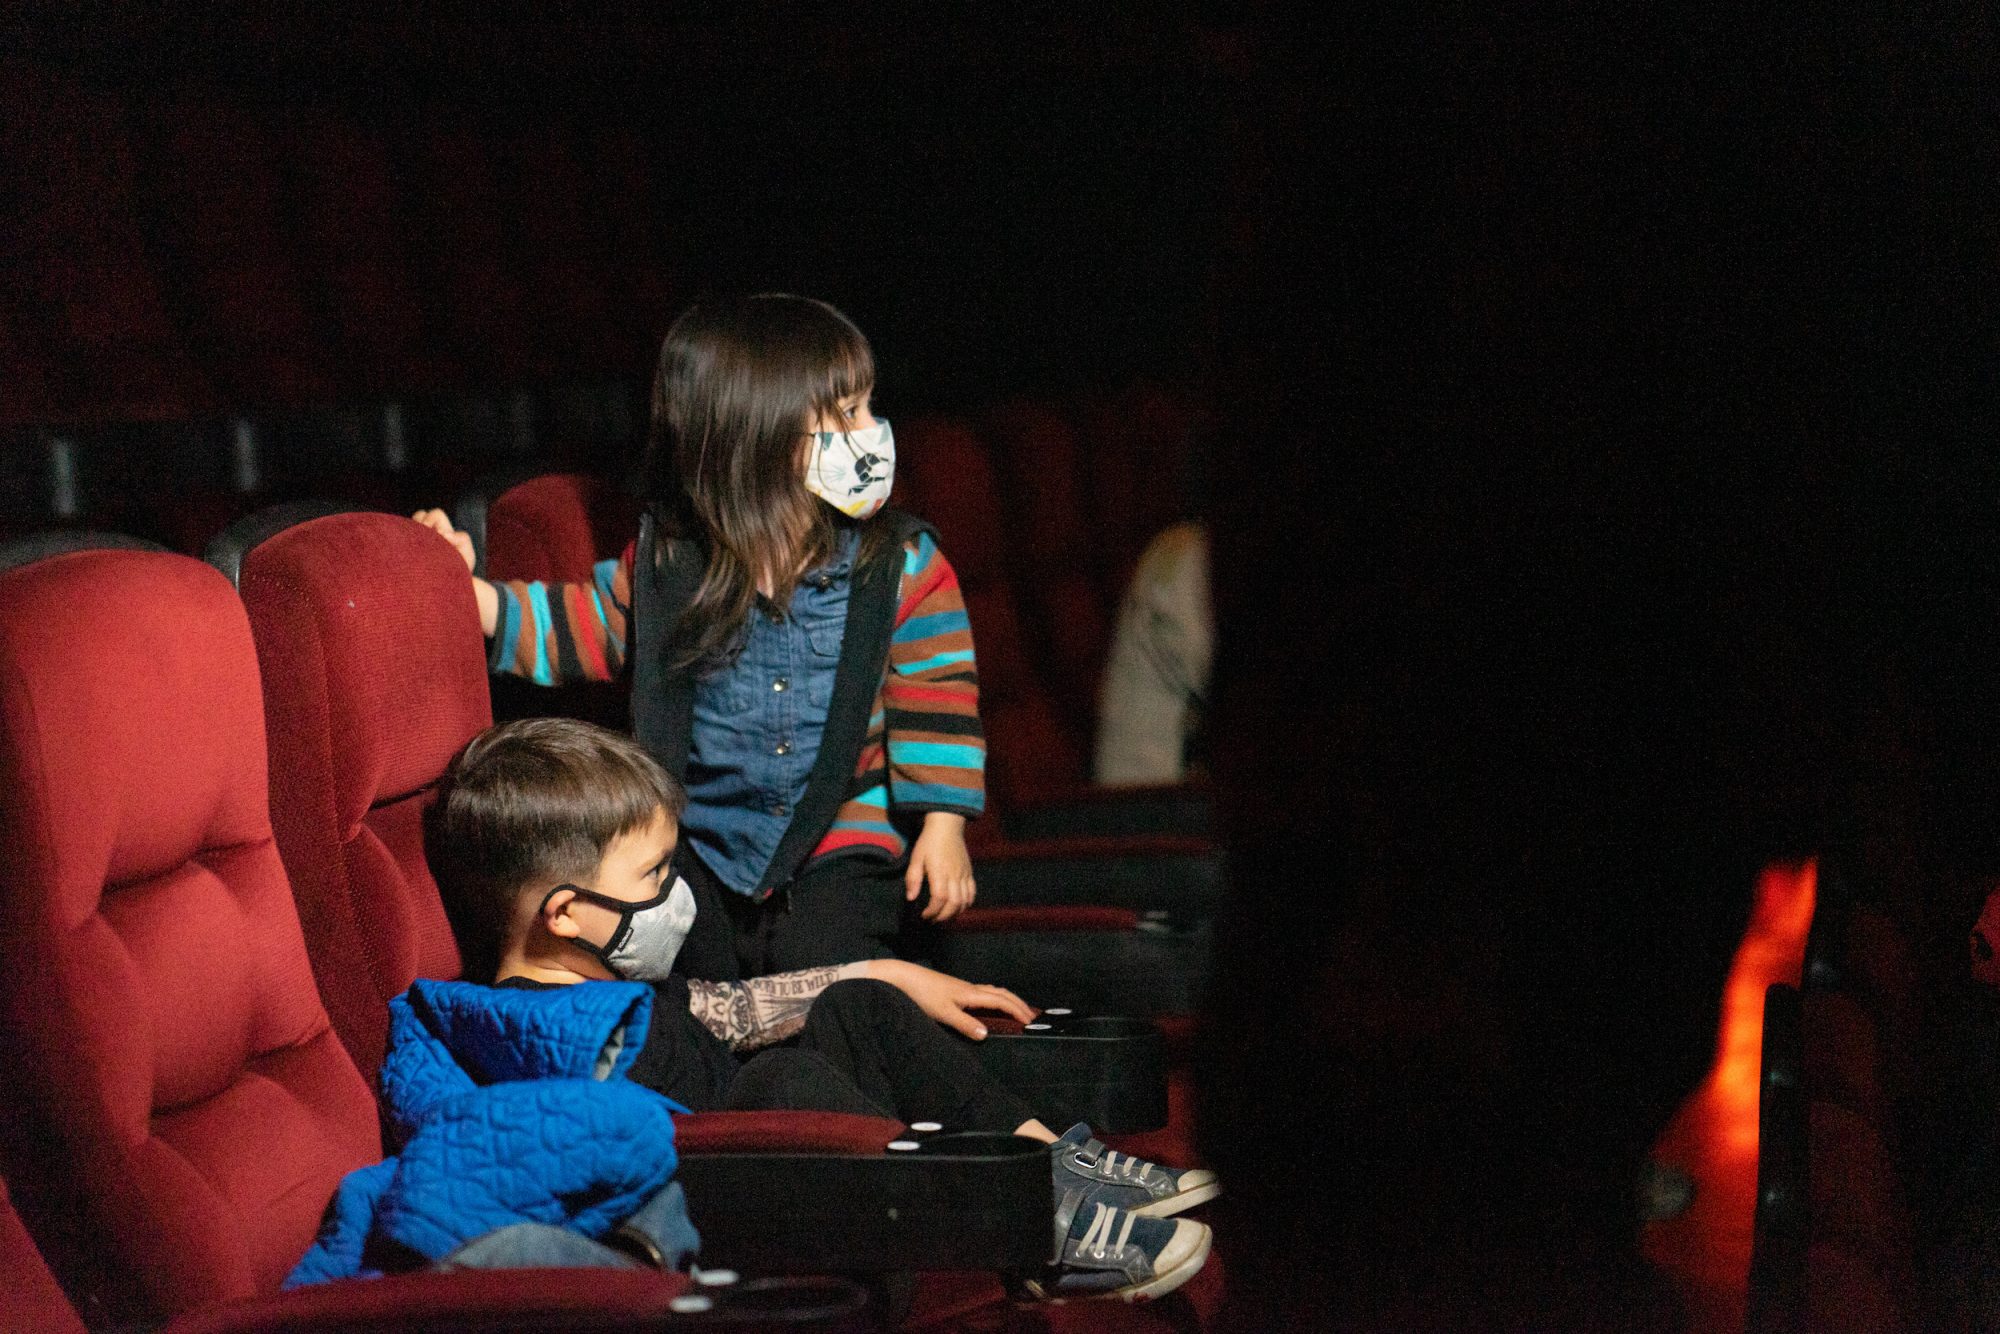 Phase 3 of lifting Covid restrictions in Qatar from Friday; kids allowed in cinemas